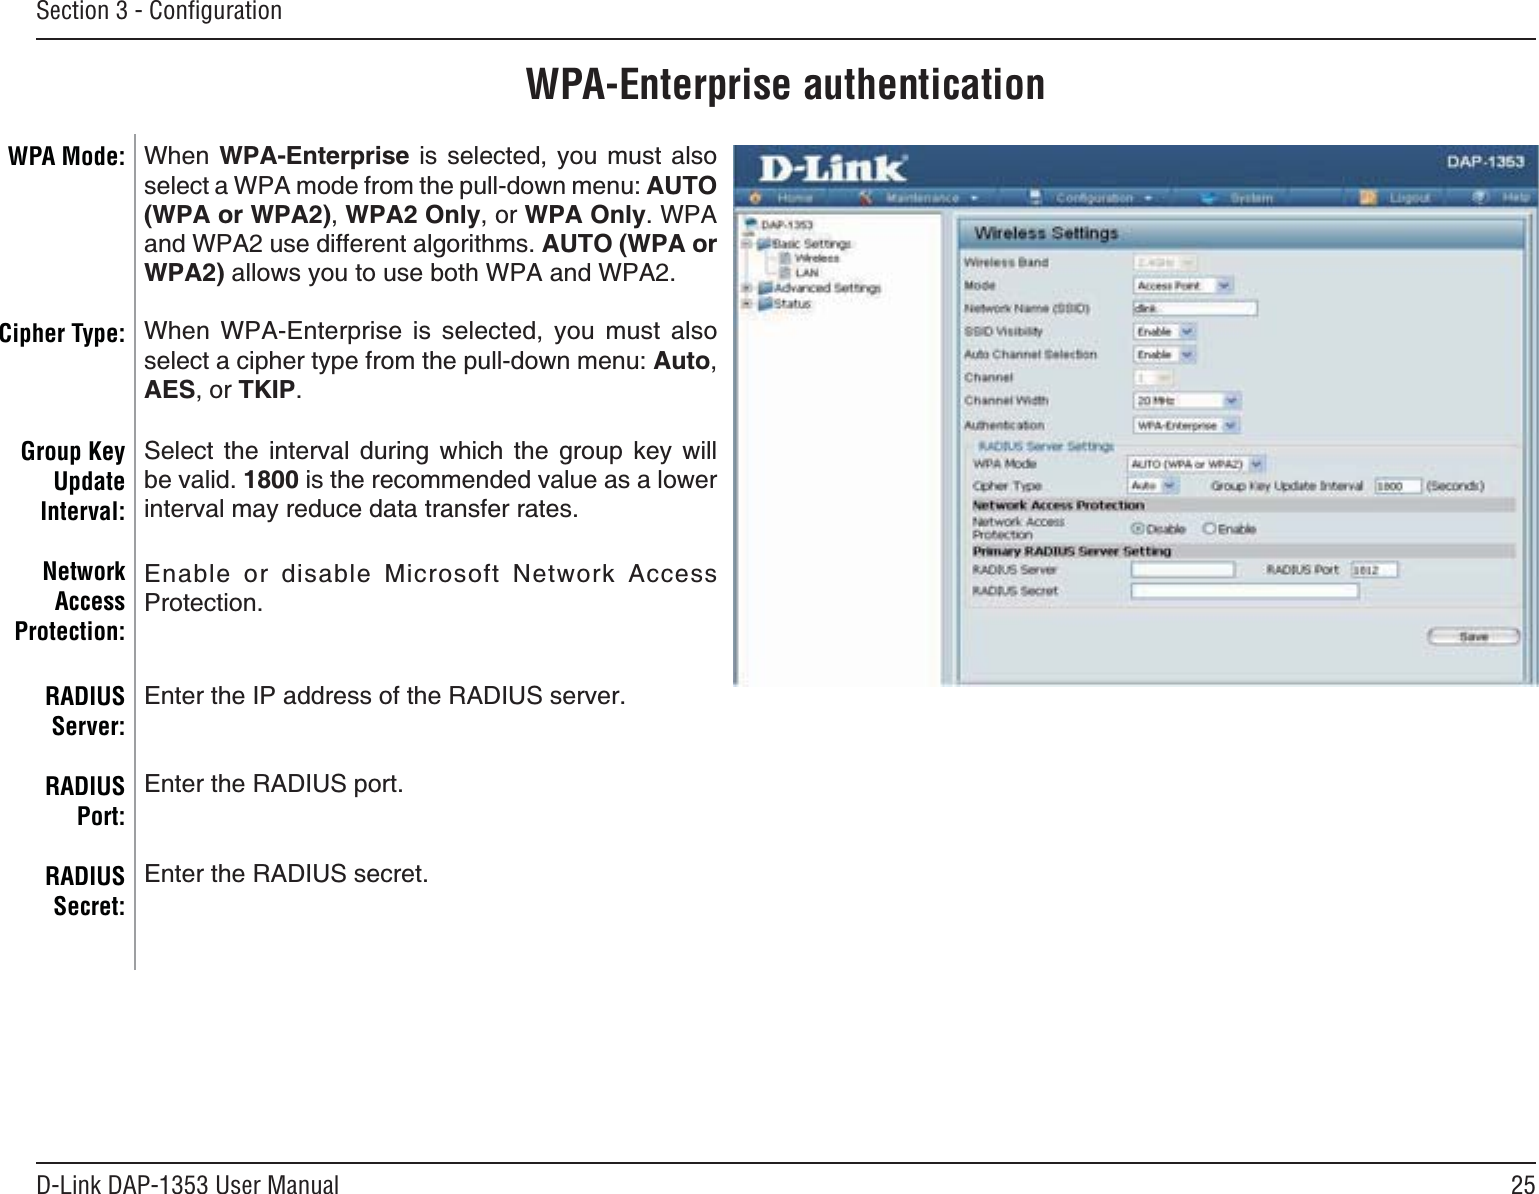 25D-Link DAP-1353 User ManualSection 3 - ConﬁgurationWPA-Enterprise authenticationWhen WPA-Enterprise is selected, you must also UGNGEVC92#OQFGHTQOVJGRWNNFQYPOGPWAUTO(WPA or WPA2),WPA2 Only, or WPA Only. WPA and WPA2 use different algorithms. AUTO (WPA or WPA2)CNNQYU[QWVQWUGDQVJ92#CPF92#When WPA-Enterprise is selected, you must also UGNGEVCEKRJGTV[RGHTQOVJGRWNNFQYPOGPWAuto,AES, or TKIP.Select the interval during which the group key will DGXCNKF1800 is the recommended value as a lower interval may reduce data transfer rates.&apos;PCDNG QT FKUCDNG /KETQUQHV 0GVYQTM #EEGUUProtection.&apos;PVGTVJG+2CFFTGUUQHVJG4#&amp;+75UGTXGT&apos;PVGTVJG4#&amp;+75RQTV&apos;PVGTVJG4#&amp;+75UGETGVWPA Mode: Cipher Type:Group Key UpdateInterval:NetworkAccessProtection:RADIUSServer:RADIUSPort:RADIUSSecret: